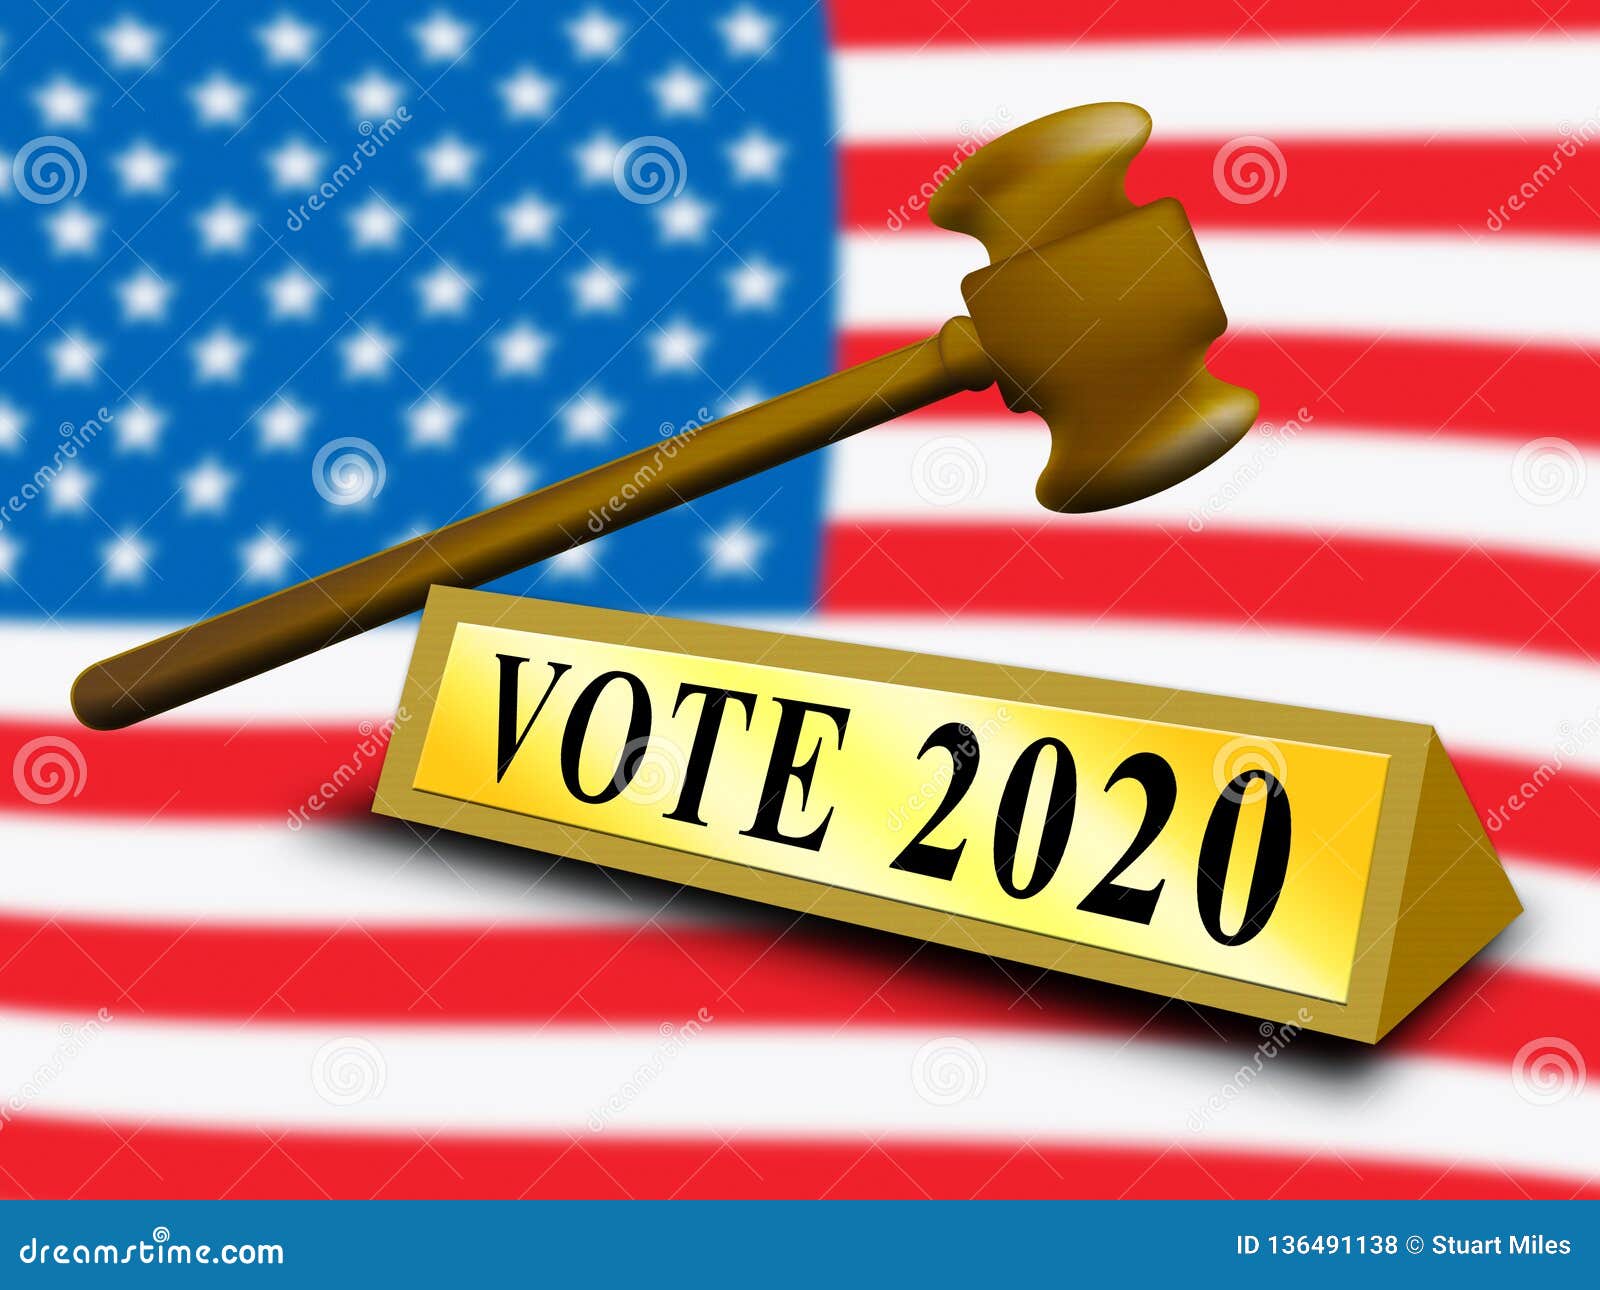 2020 Election Usa Presidential Vote for Candidates - 3d Illustration ...